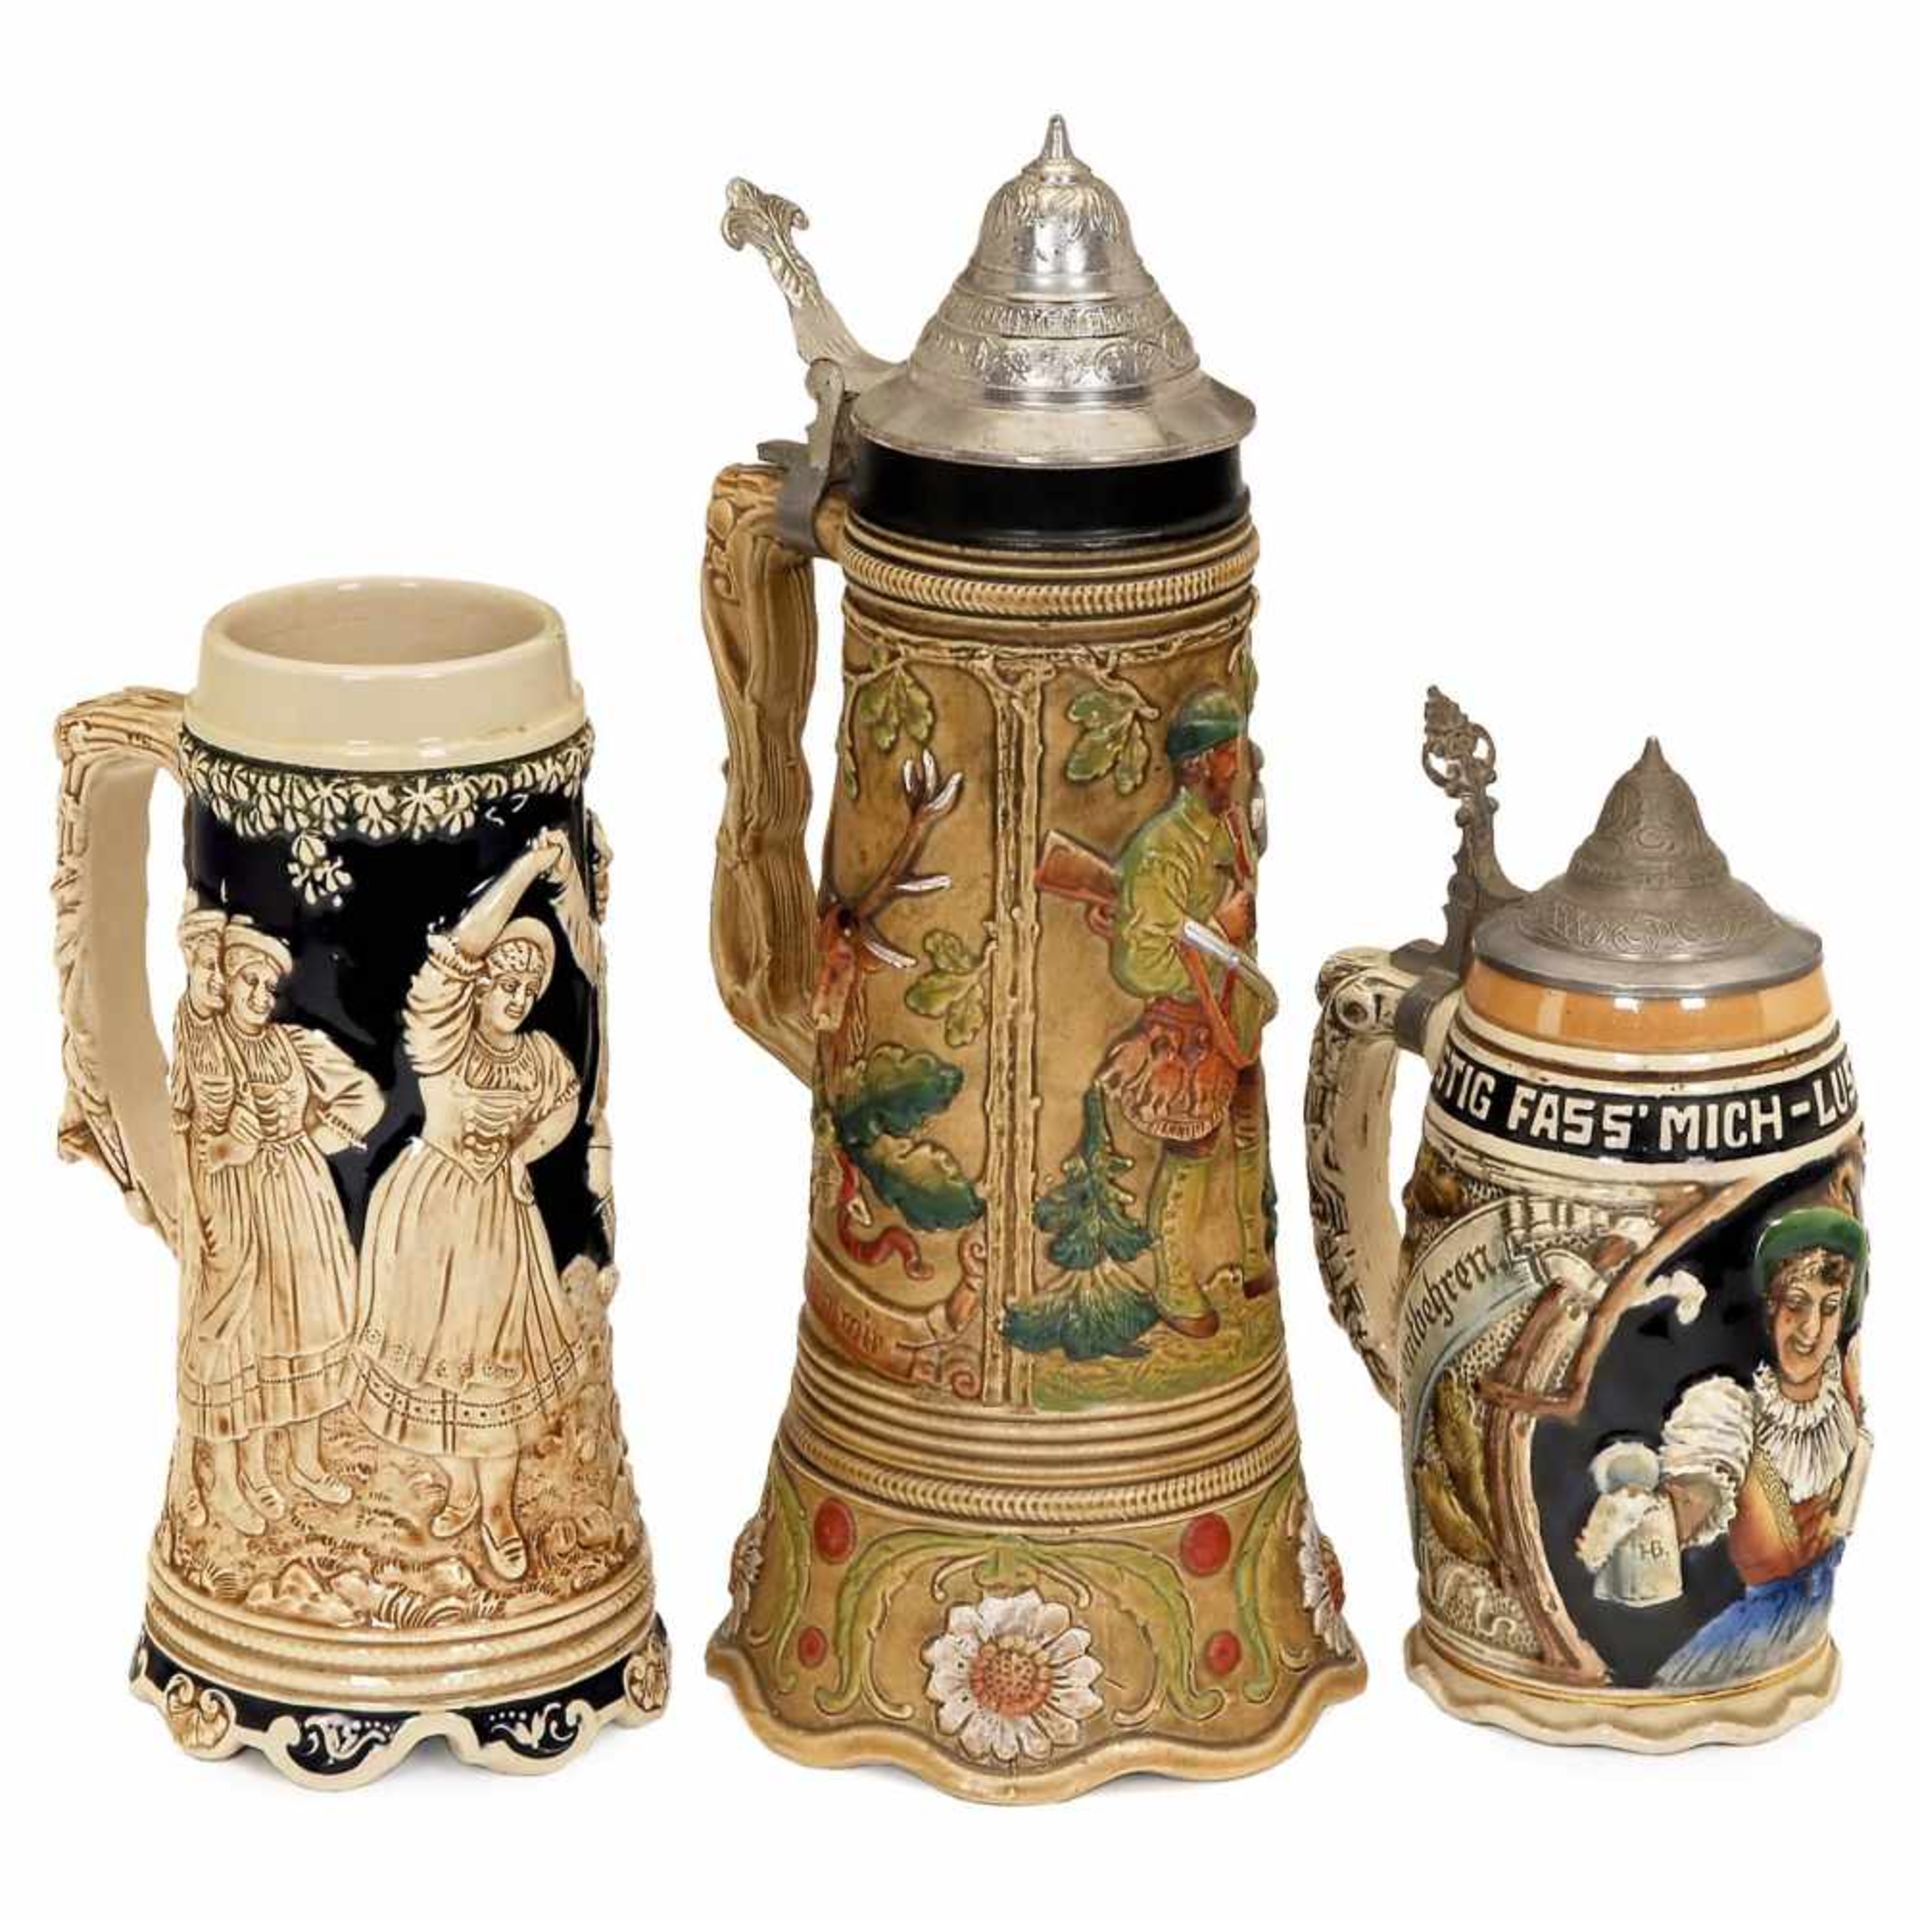 3 Musical Beer SteinsCeramic, polychrome decorated in relief, 2 steins with tin lid, movements in